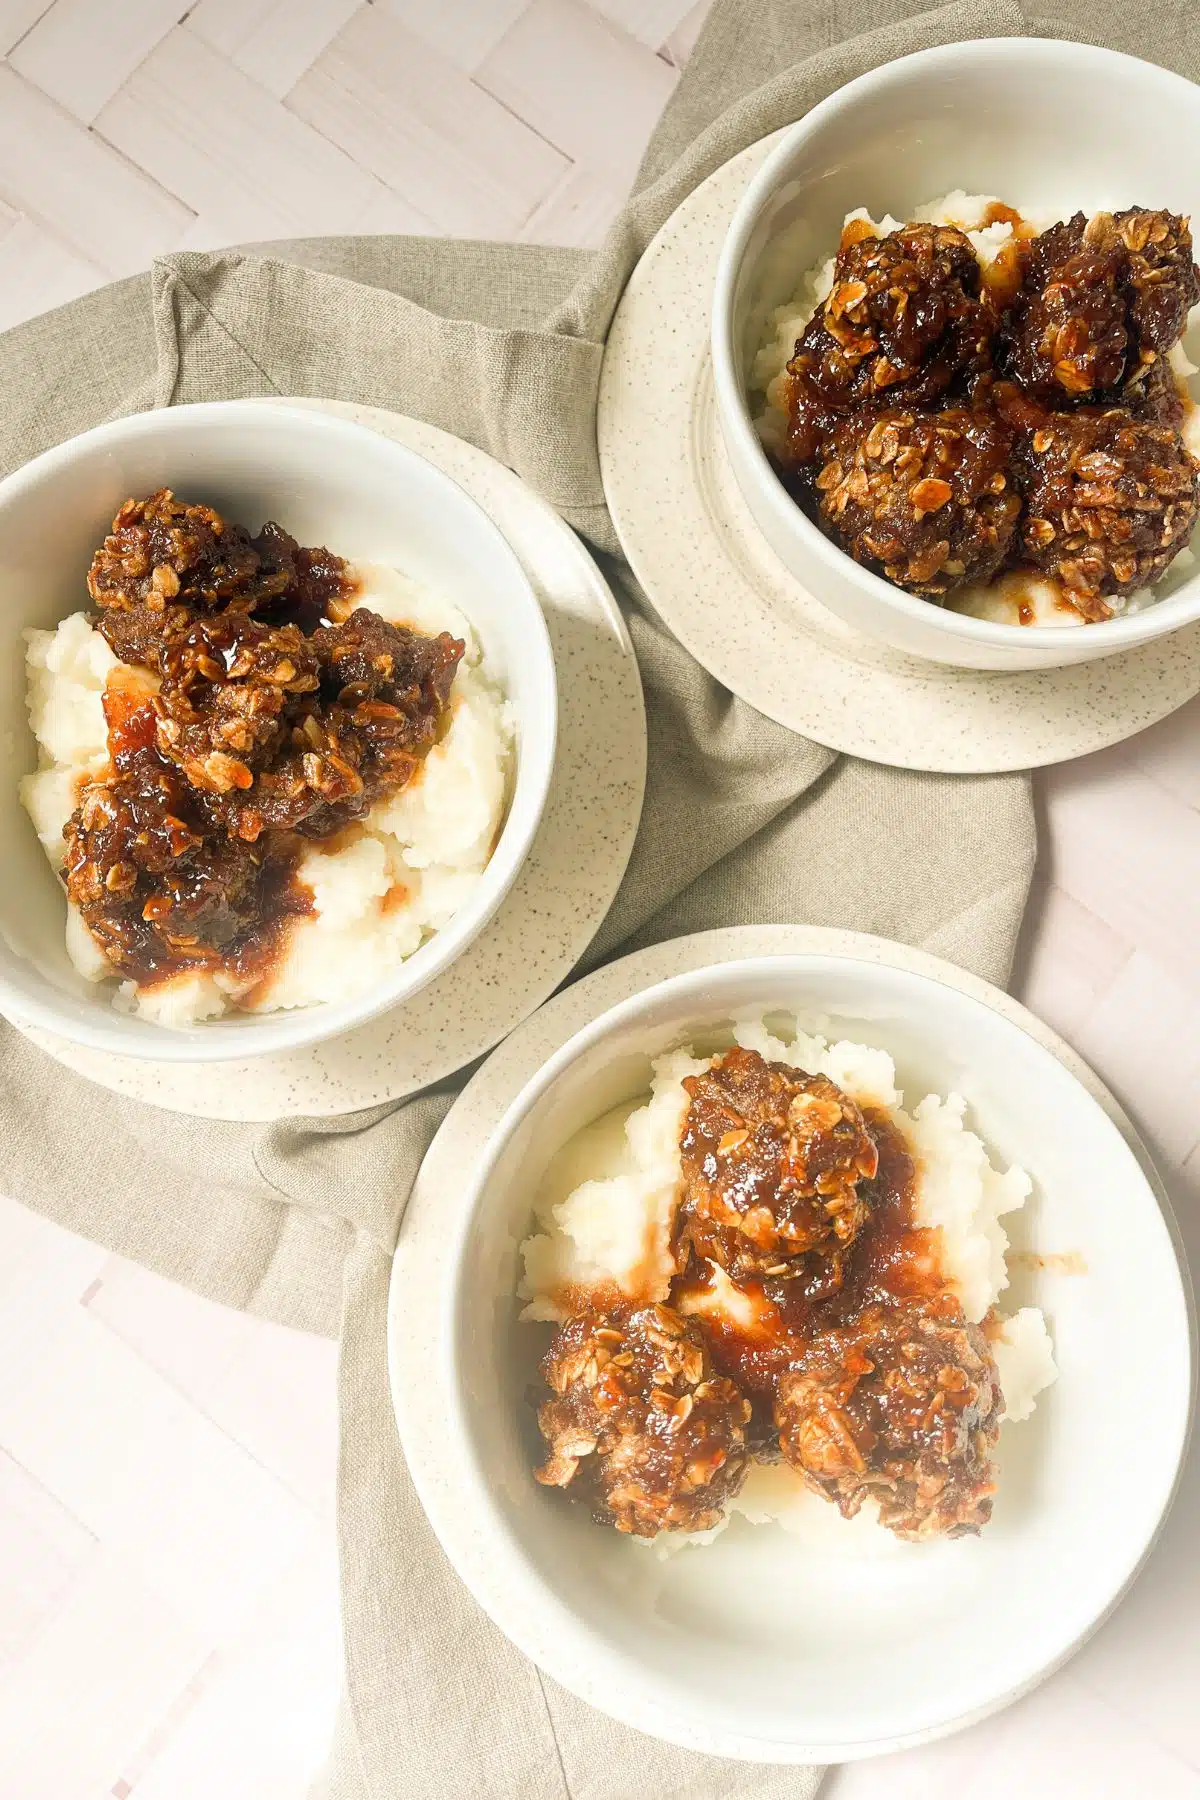 Three bowls of meatballs and mashed potatoes.